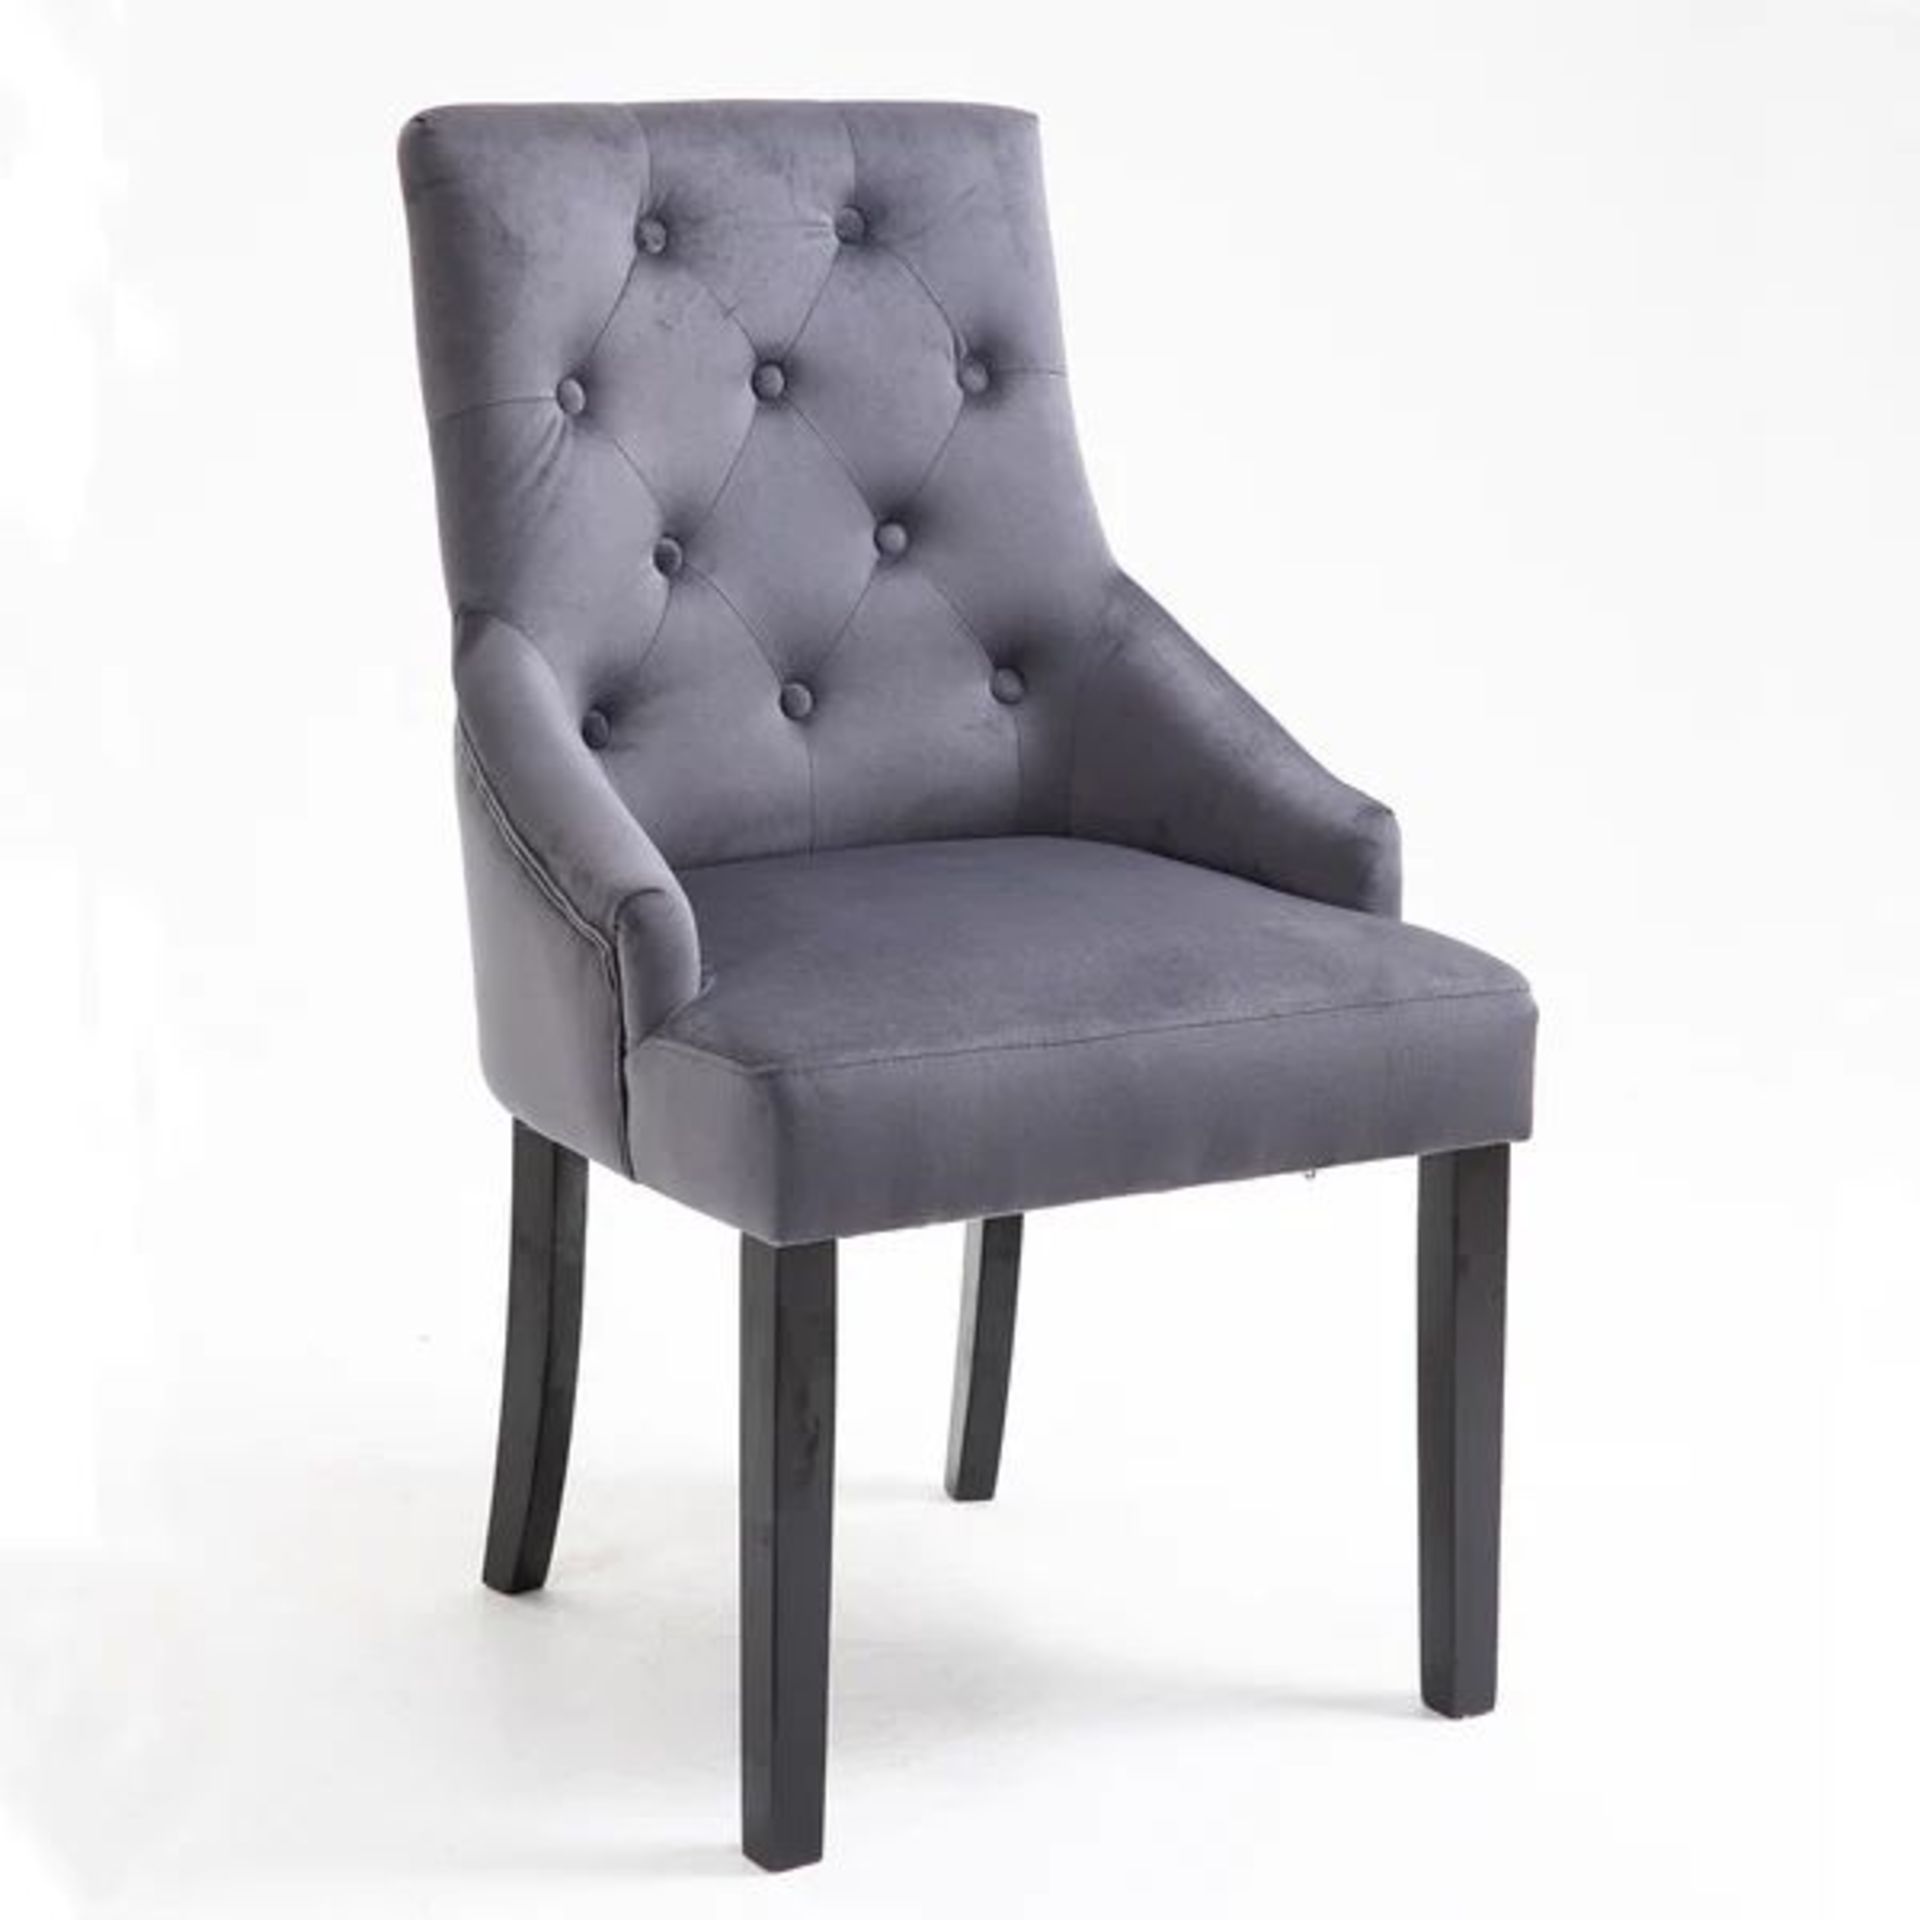 Harbury Set of 2 Buttoned Dining Chairs (Dark Grey Velvet with Black Legs). - BI. RRP £309.99. Our - Image 2 of 2